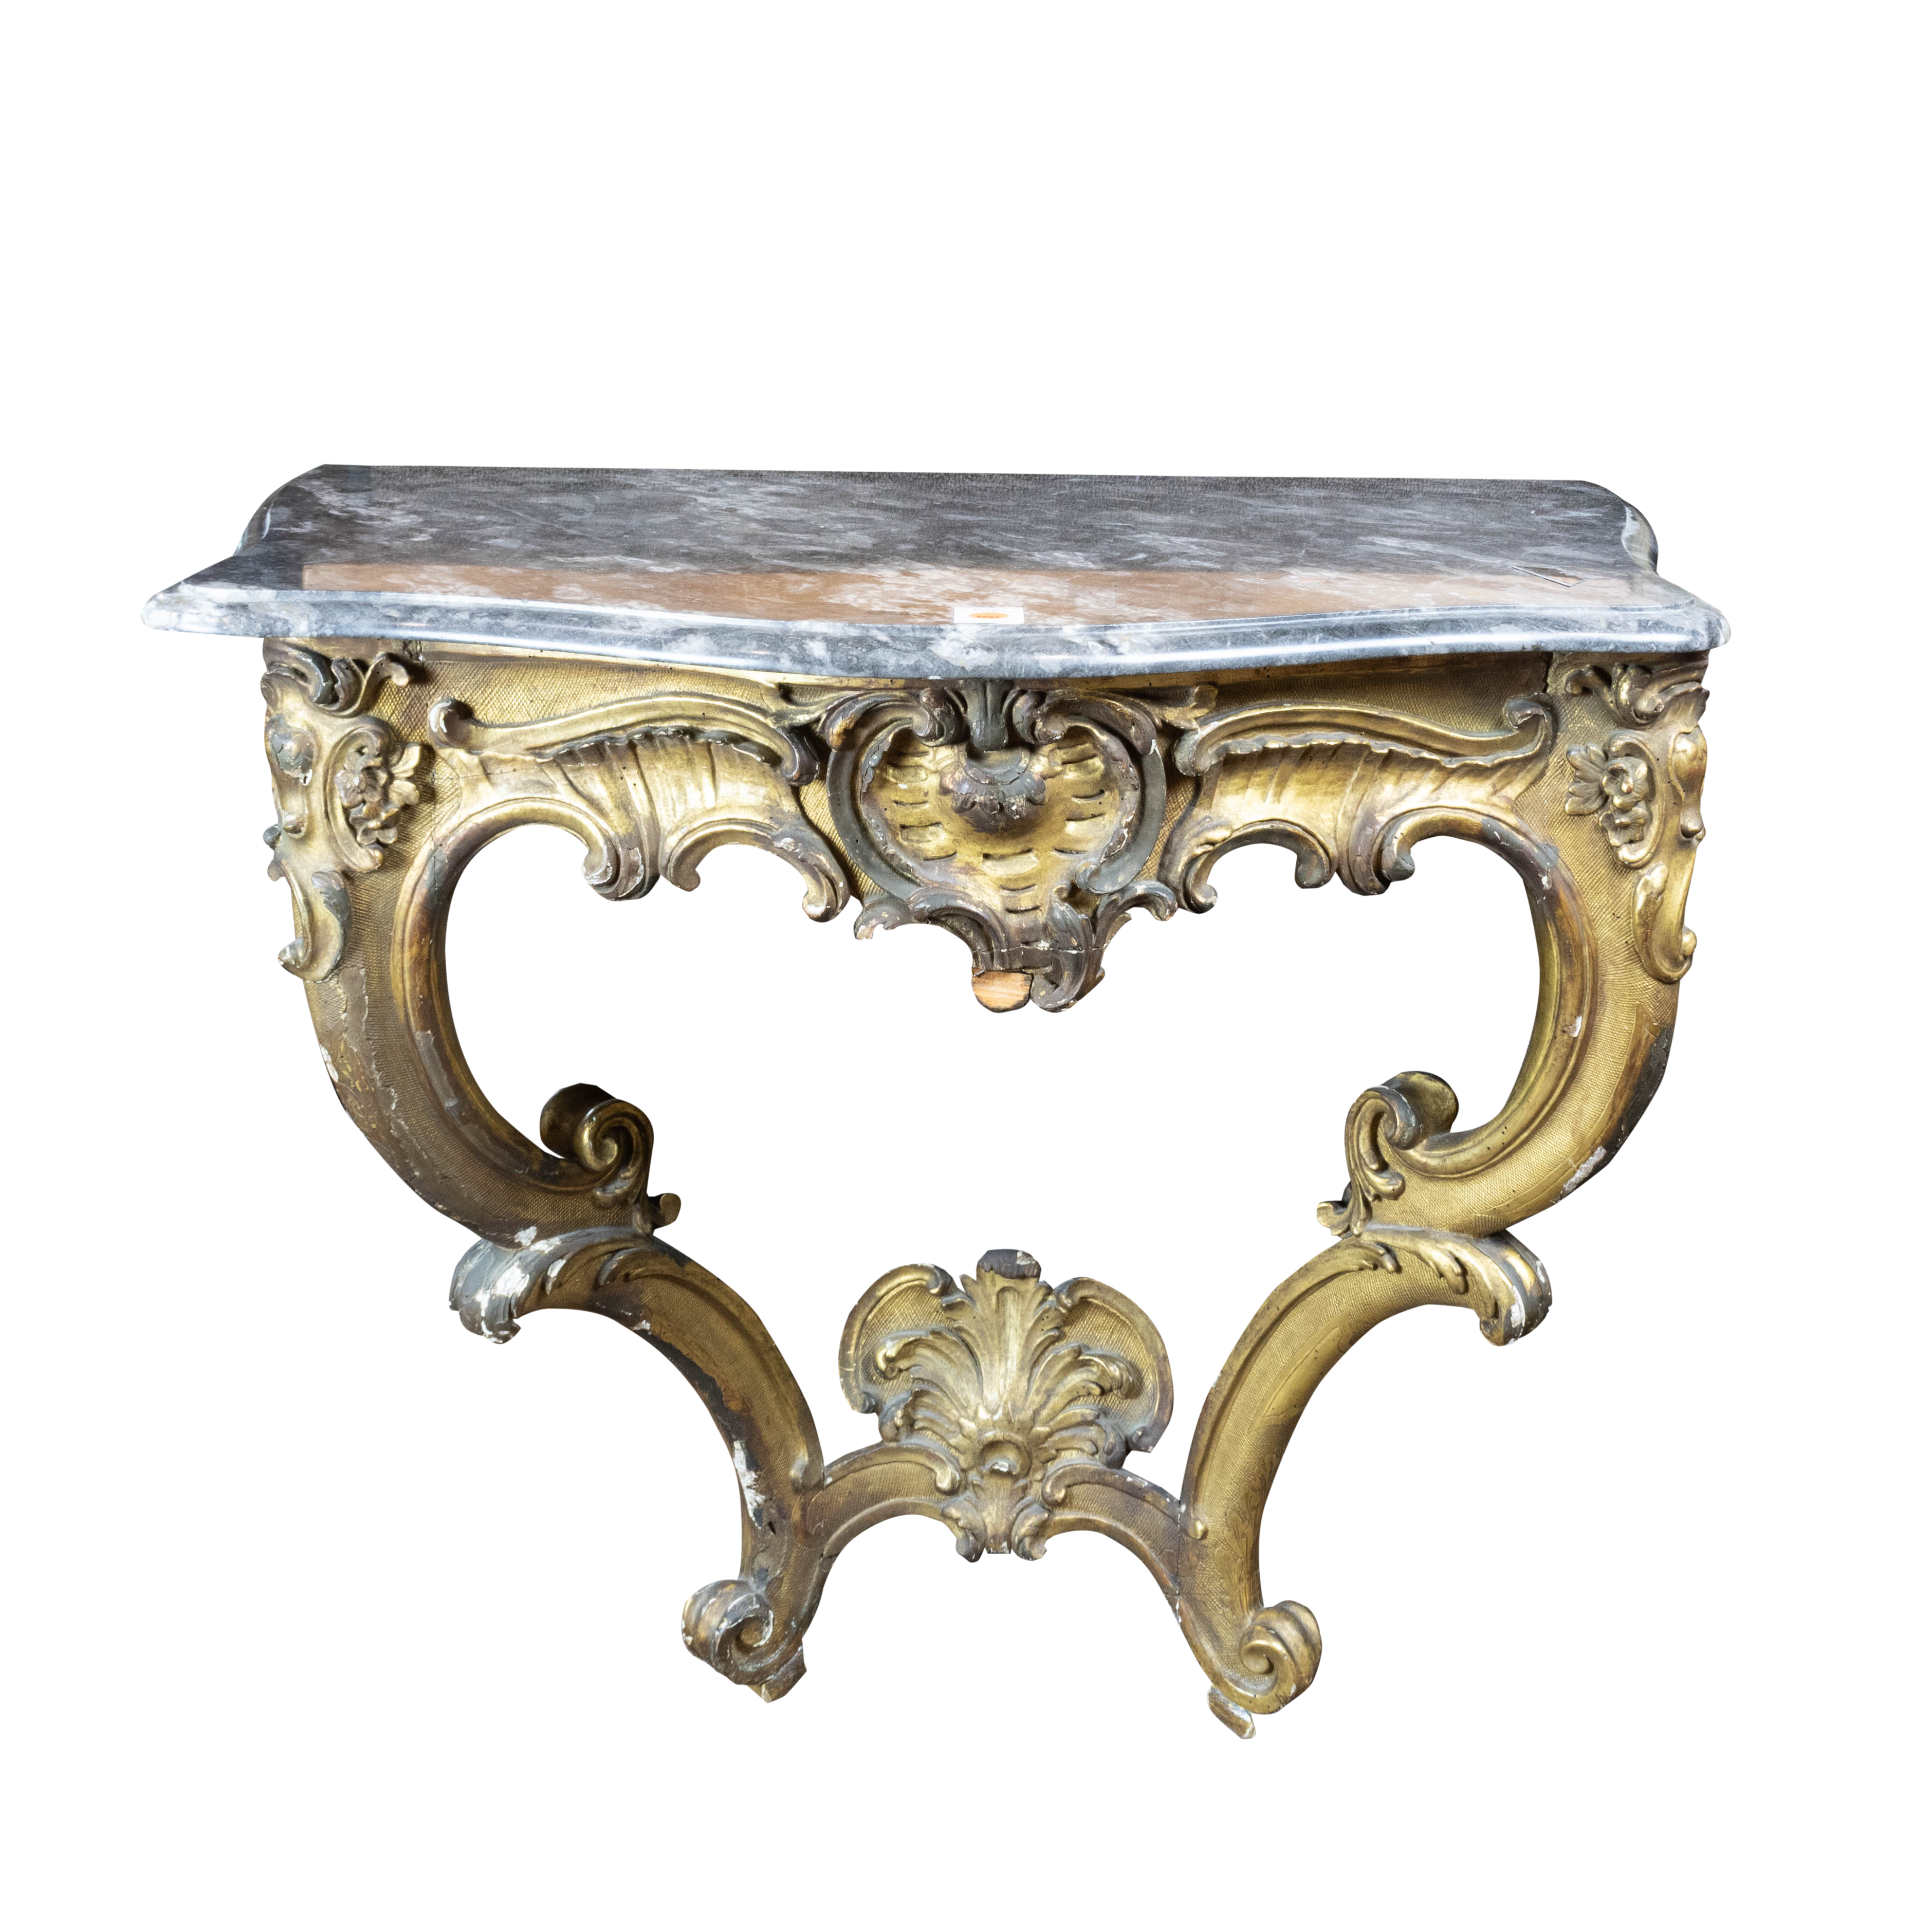 A GILTWOOD CARVED MARBLE TOP CONSOLE